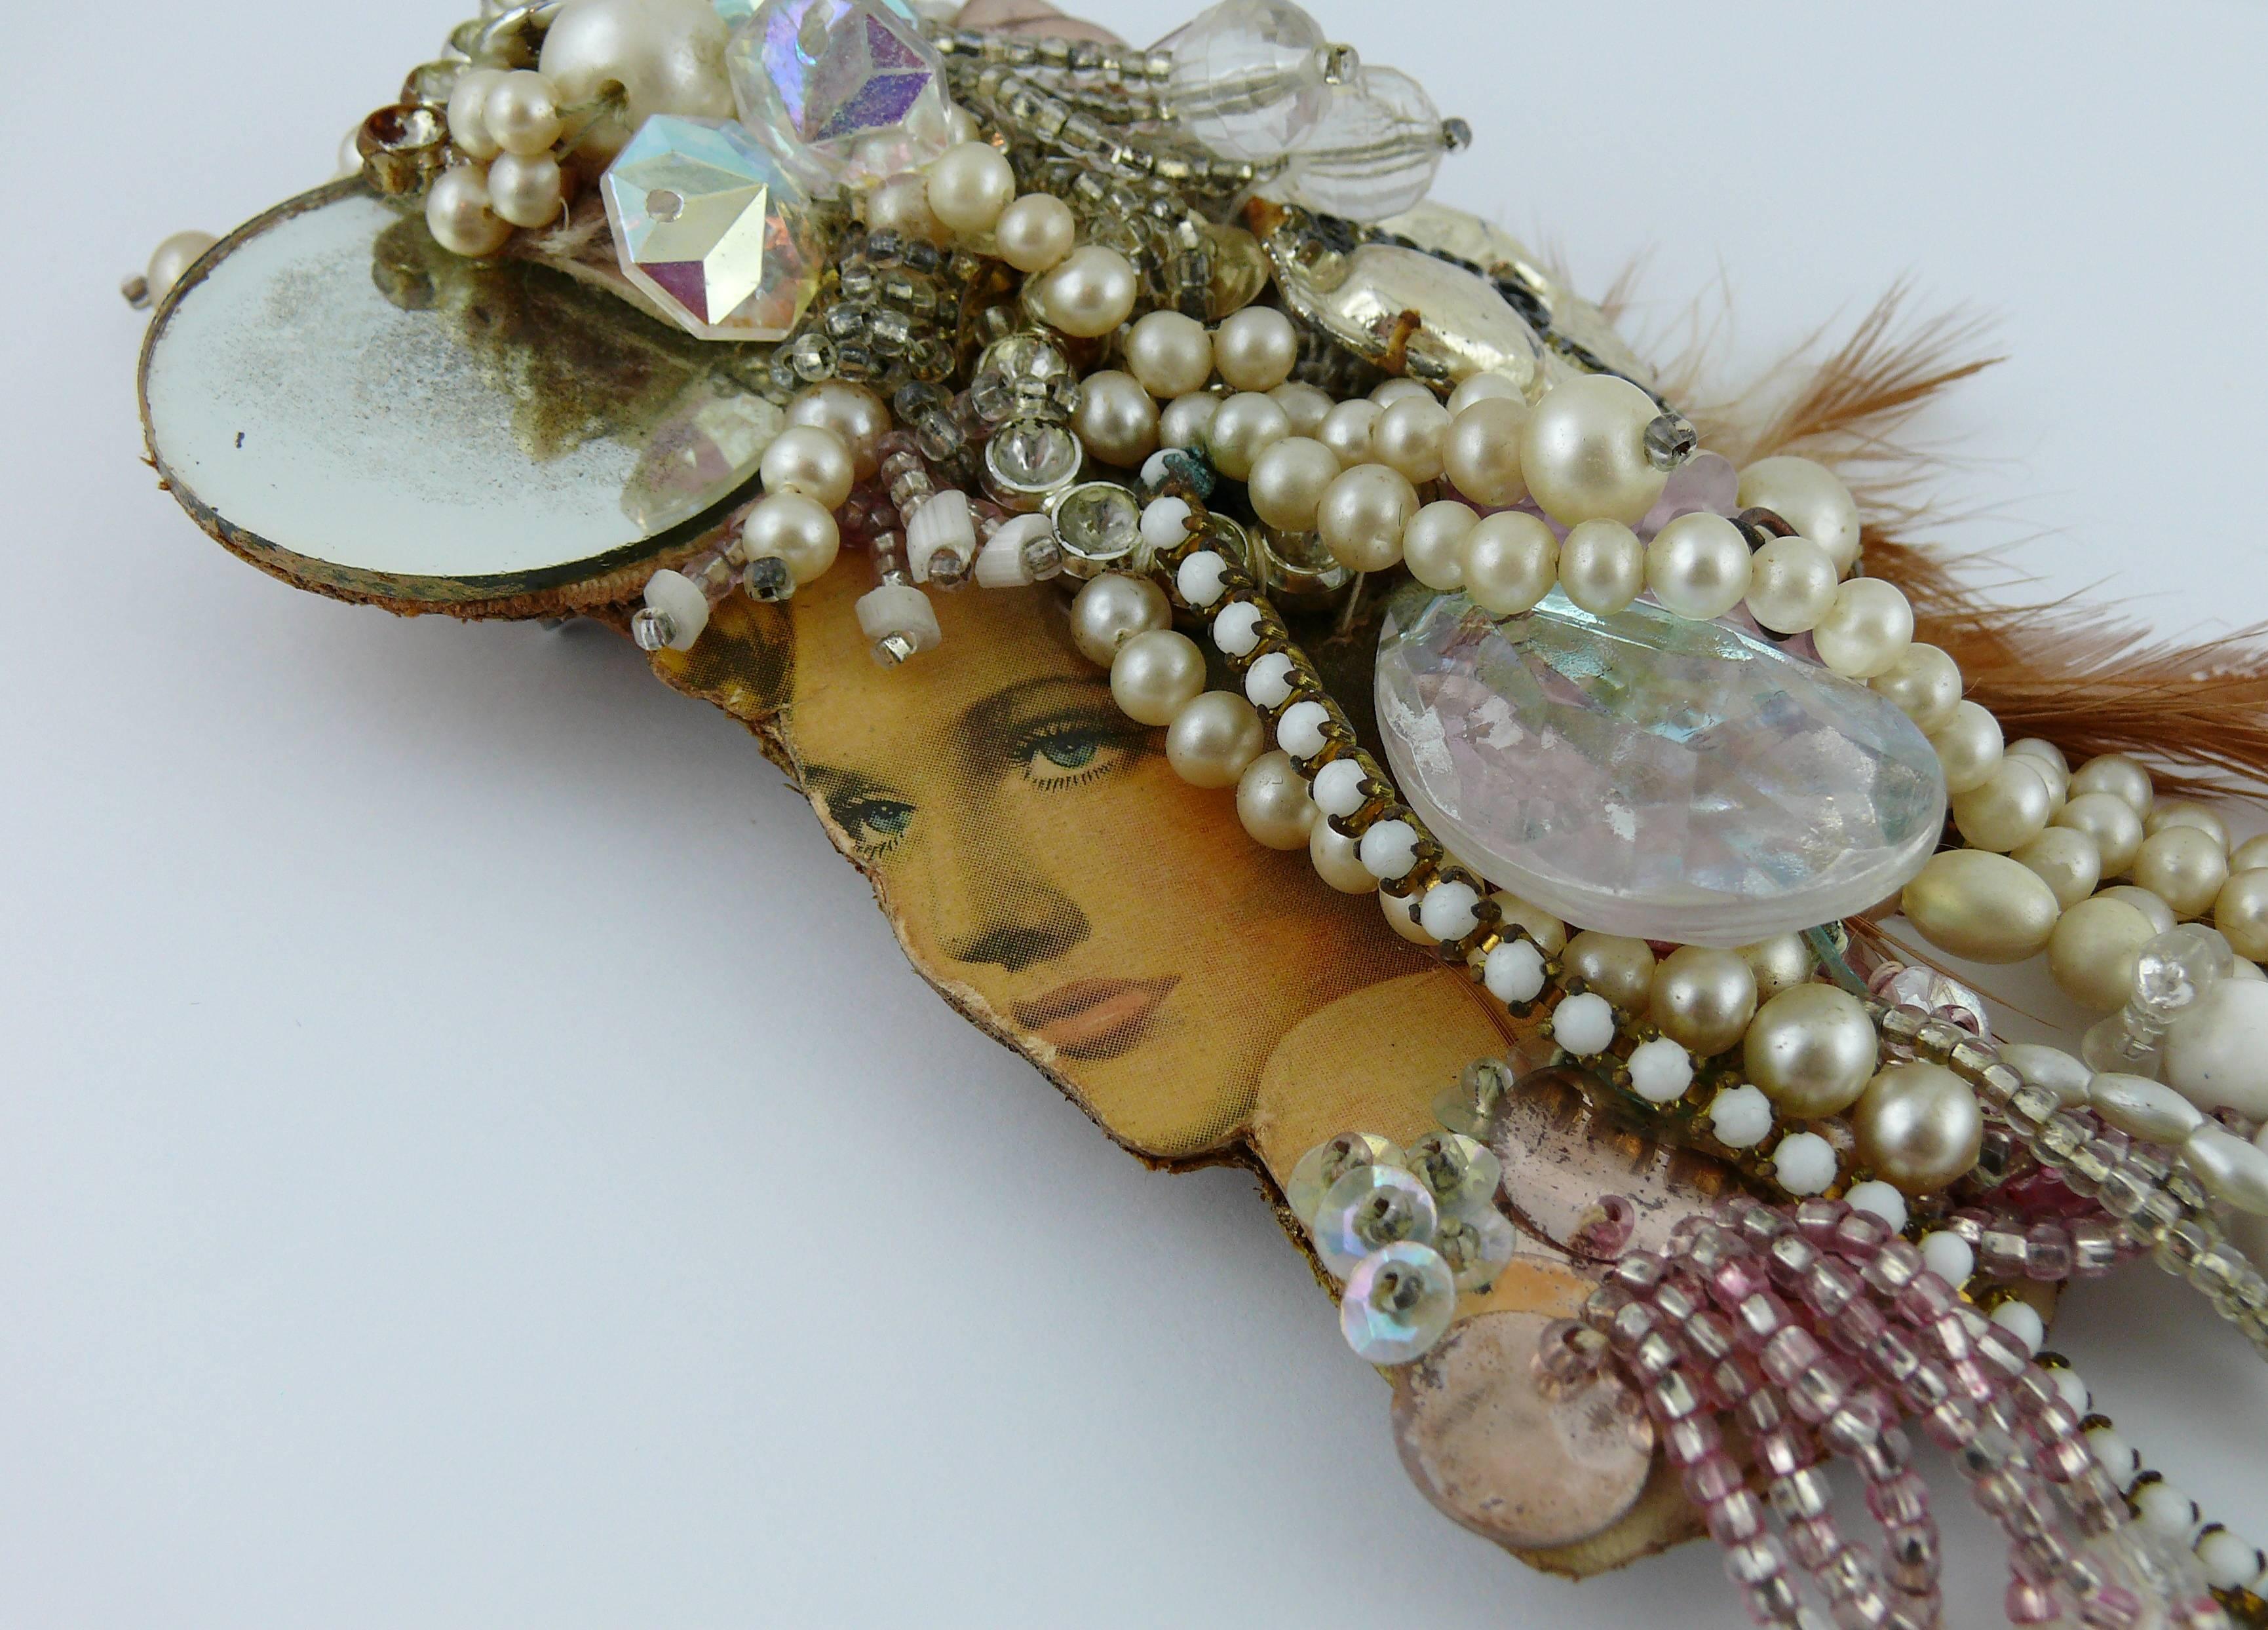 LILIANE MULLER fabulous vintage opulent huge brooch featuring a retro woman print profile embellished with faux pearls, glass beads, resin cabochons, mirror, feathers, etc...

Label © LILIANE MULLER.

Indicative measurements : max. height approx. 19